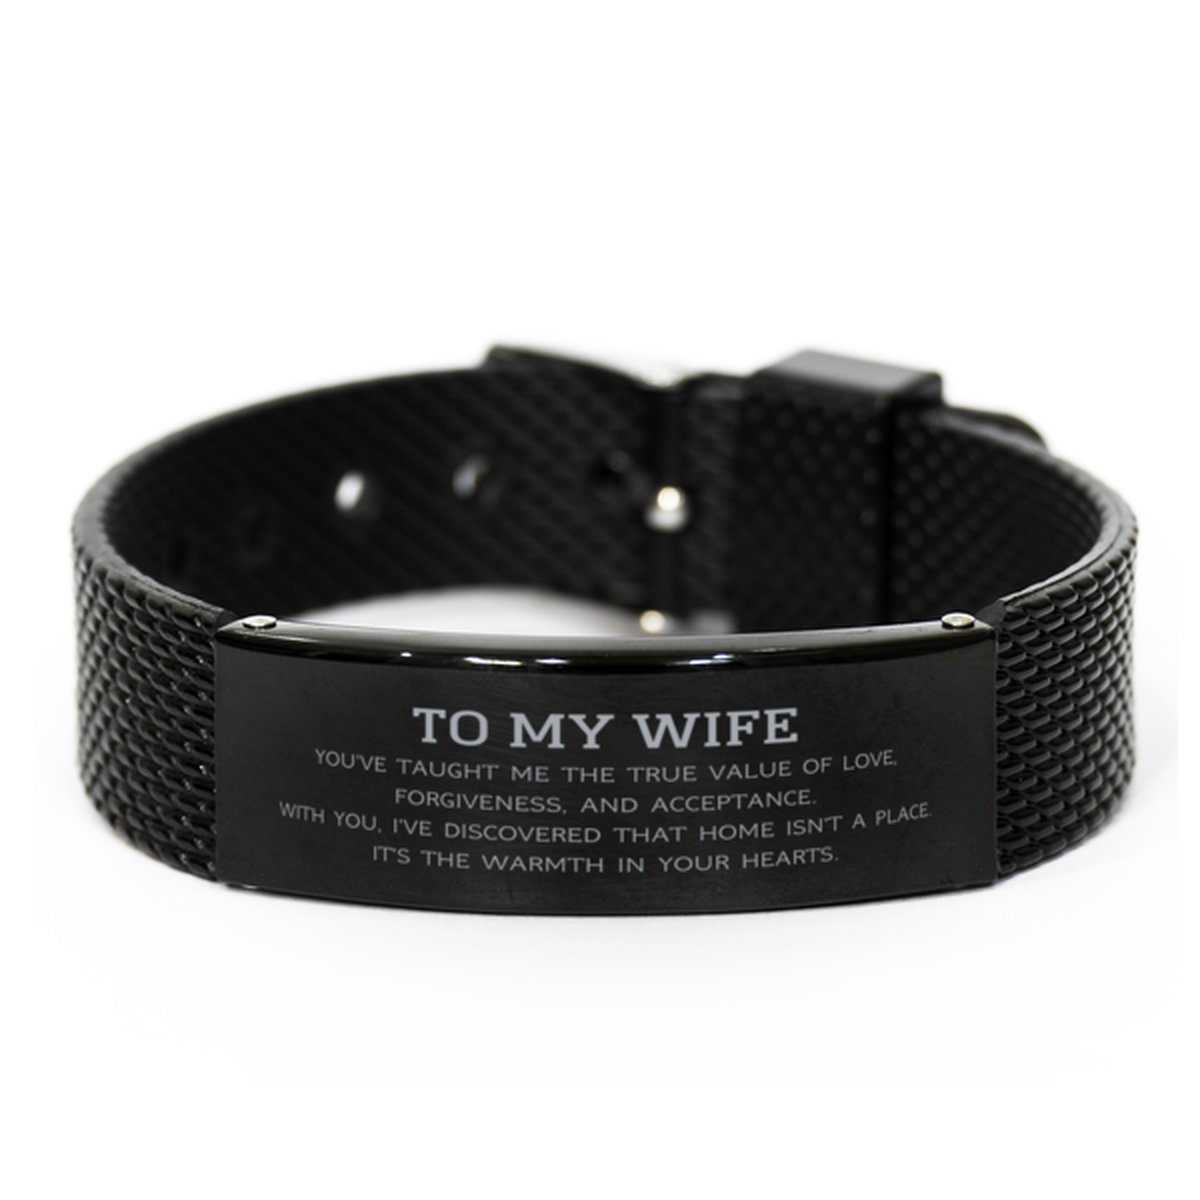 To My Wife Gifts, You've taught me the true value of love, Thank You Gifts For Wife, Birthday Black Shark Mesh Bracelet For Wife